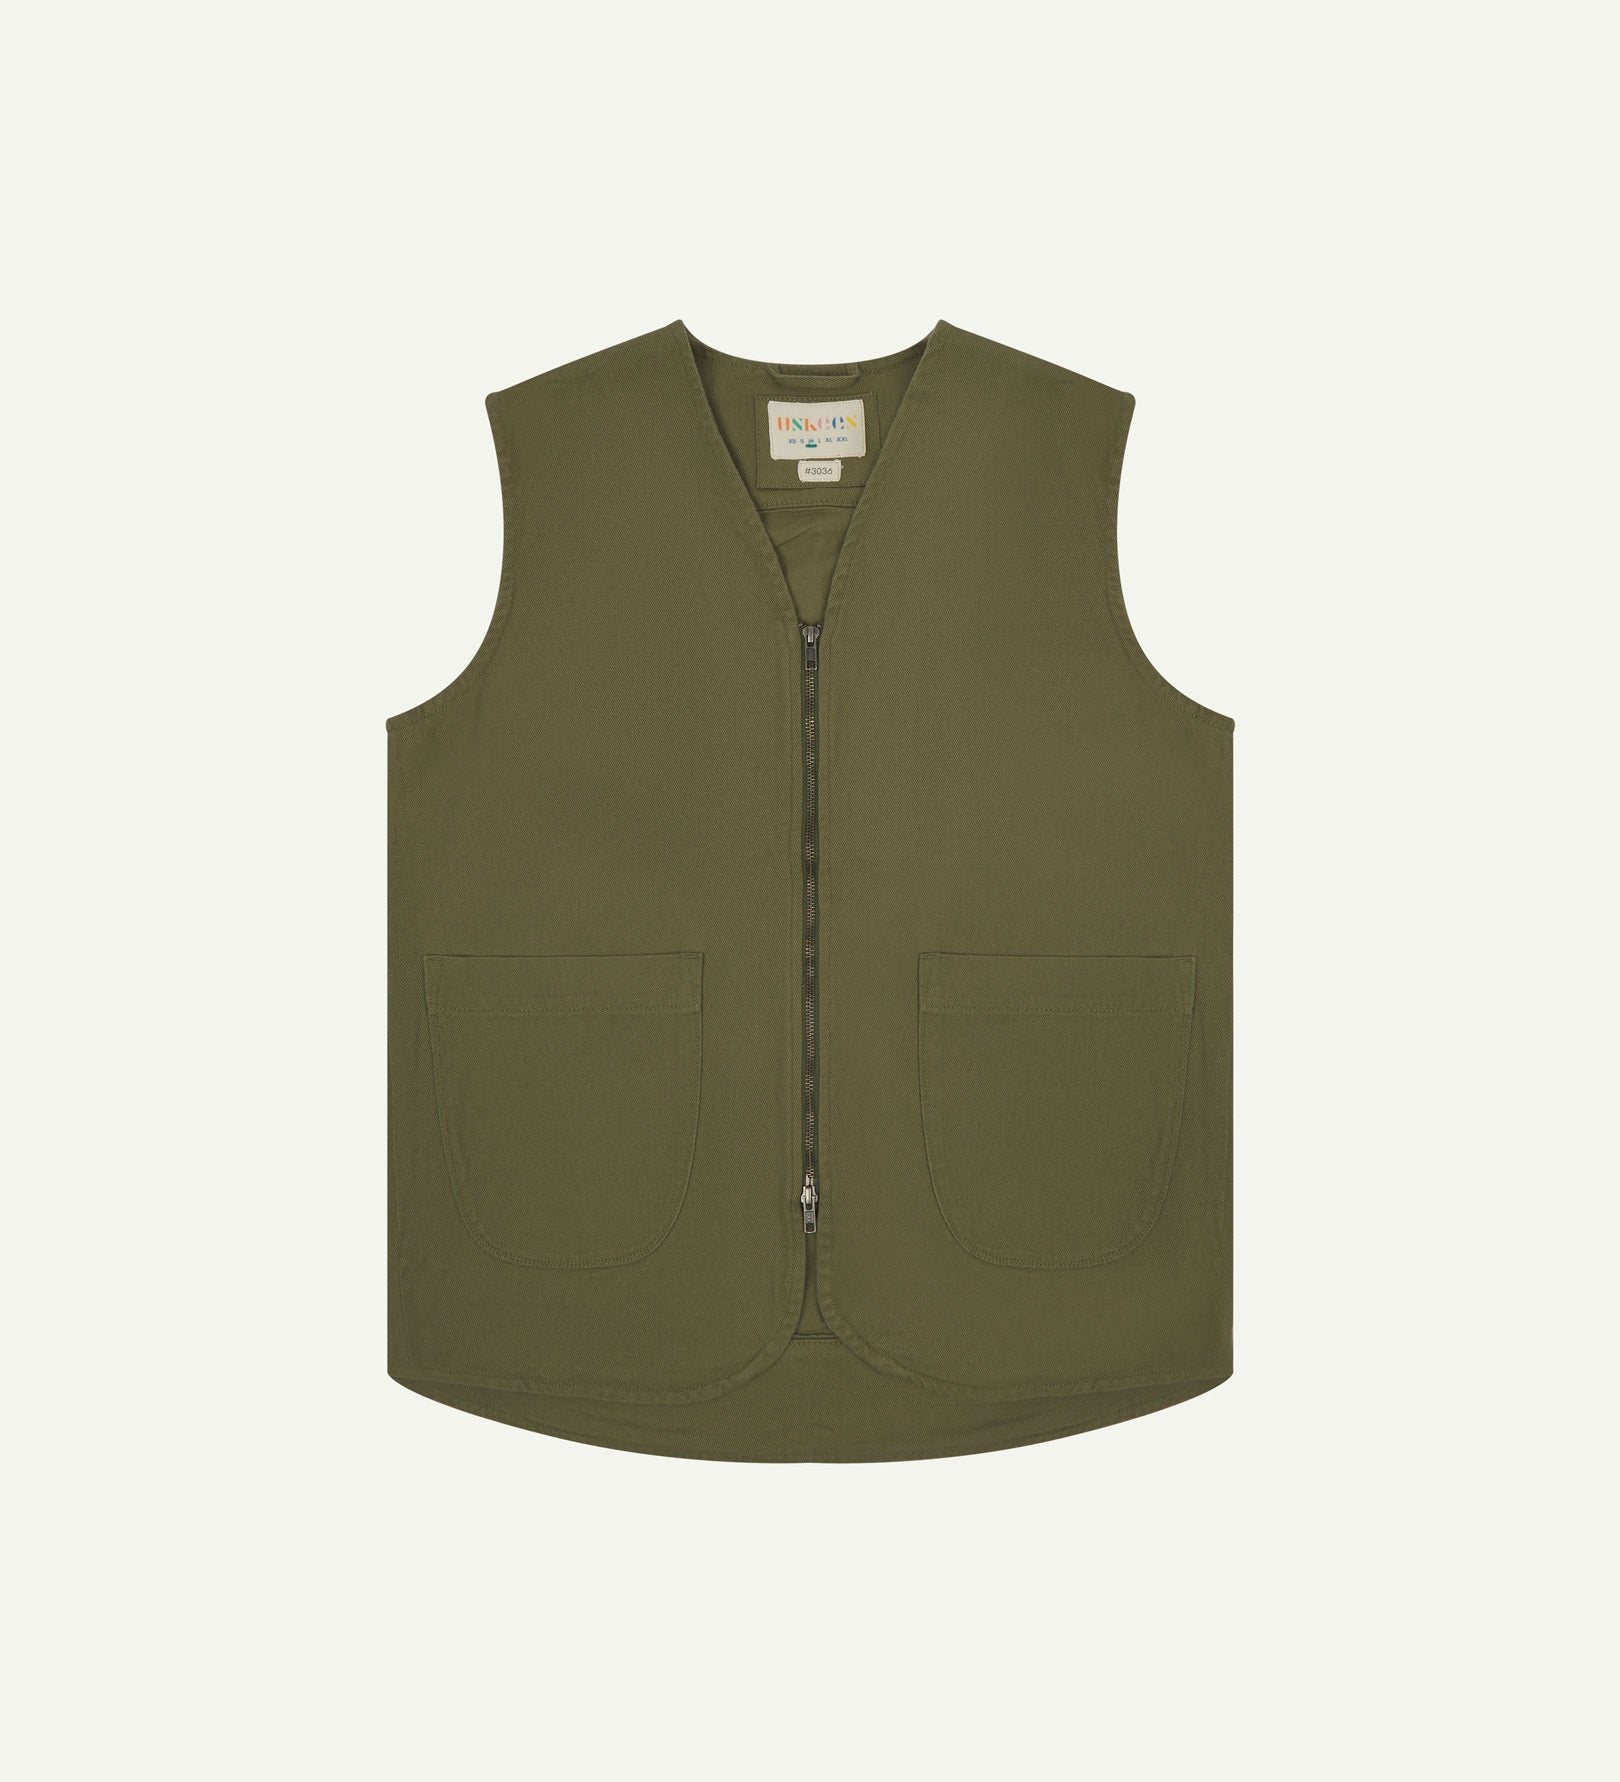 Full-length front view of Uskees #3036 moss-green organic cotton-drill vest. Fully zipped and showing clear view of curved patch pockets and branding label.